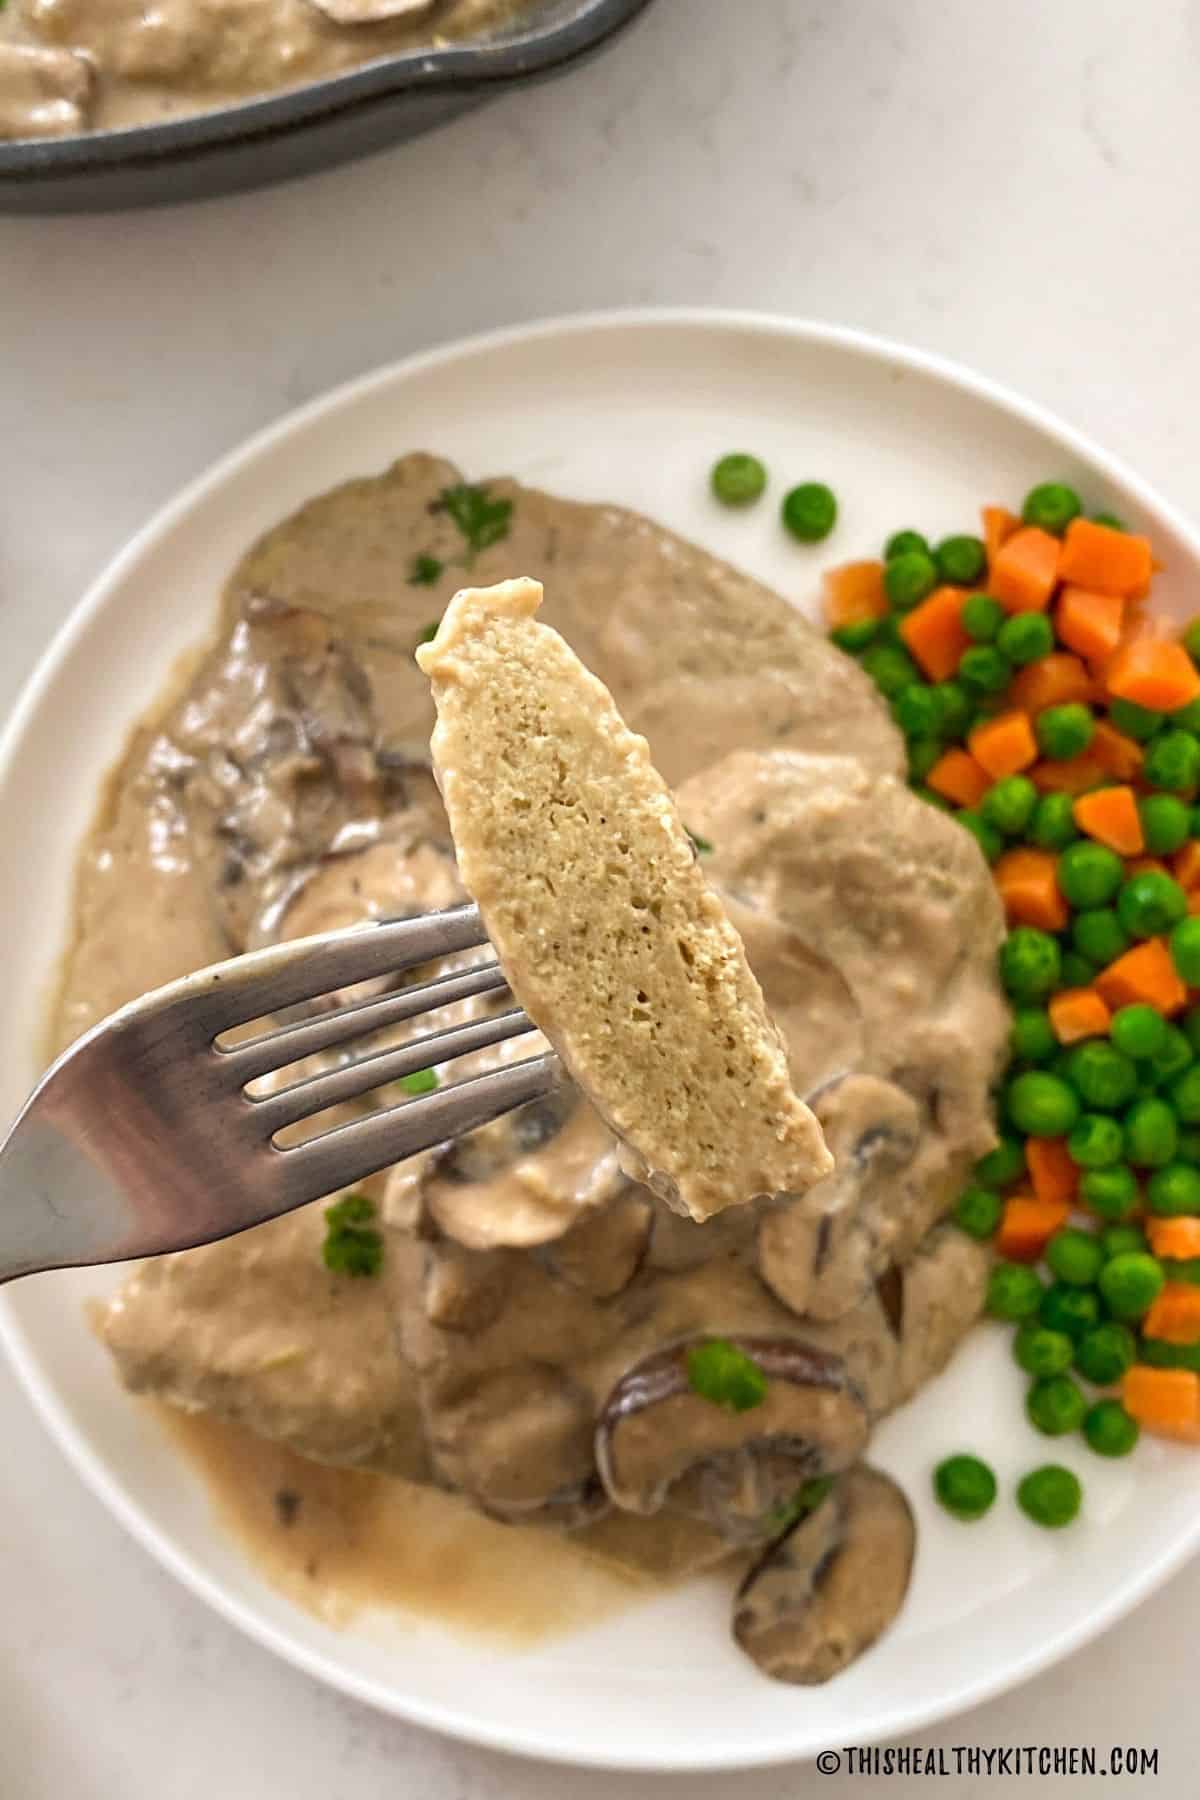 Fork holding up one bite of vegan chicken with plate of chicken and veggies below.